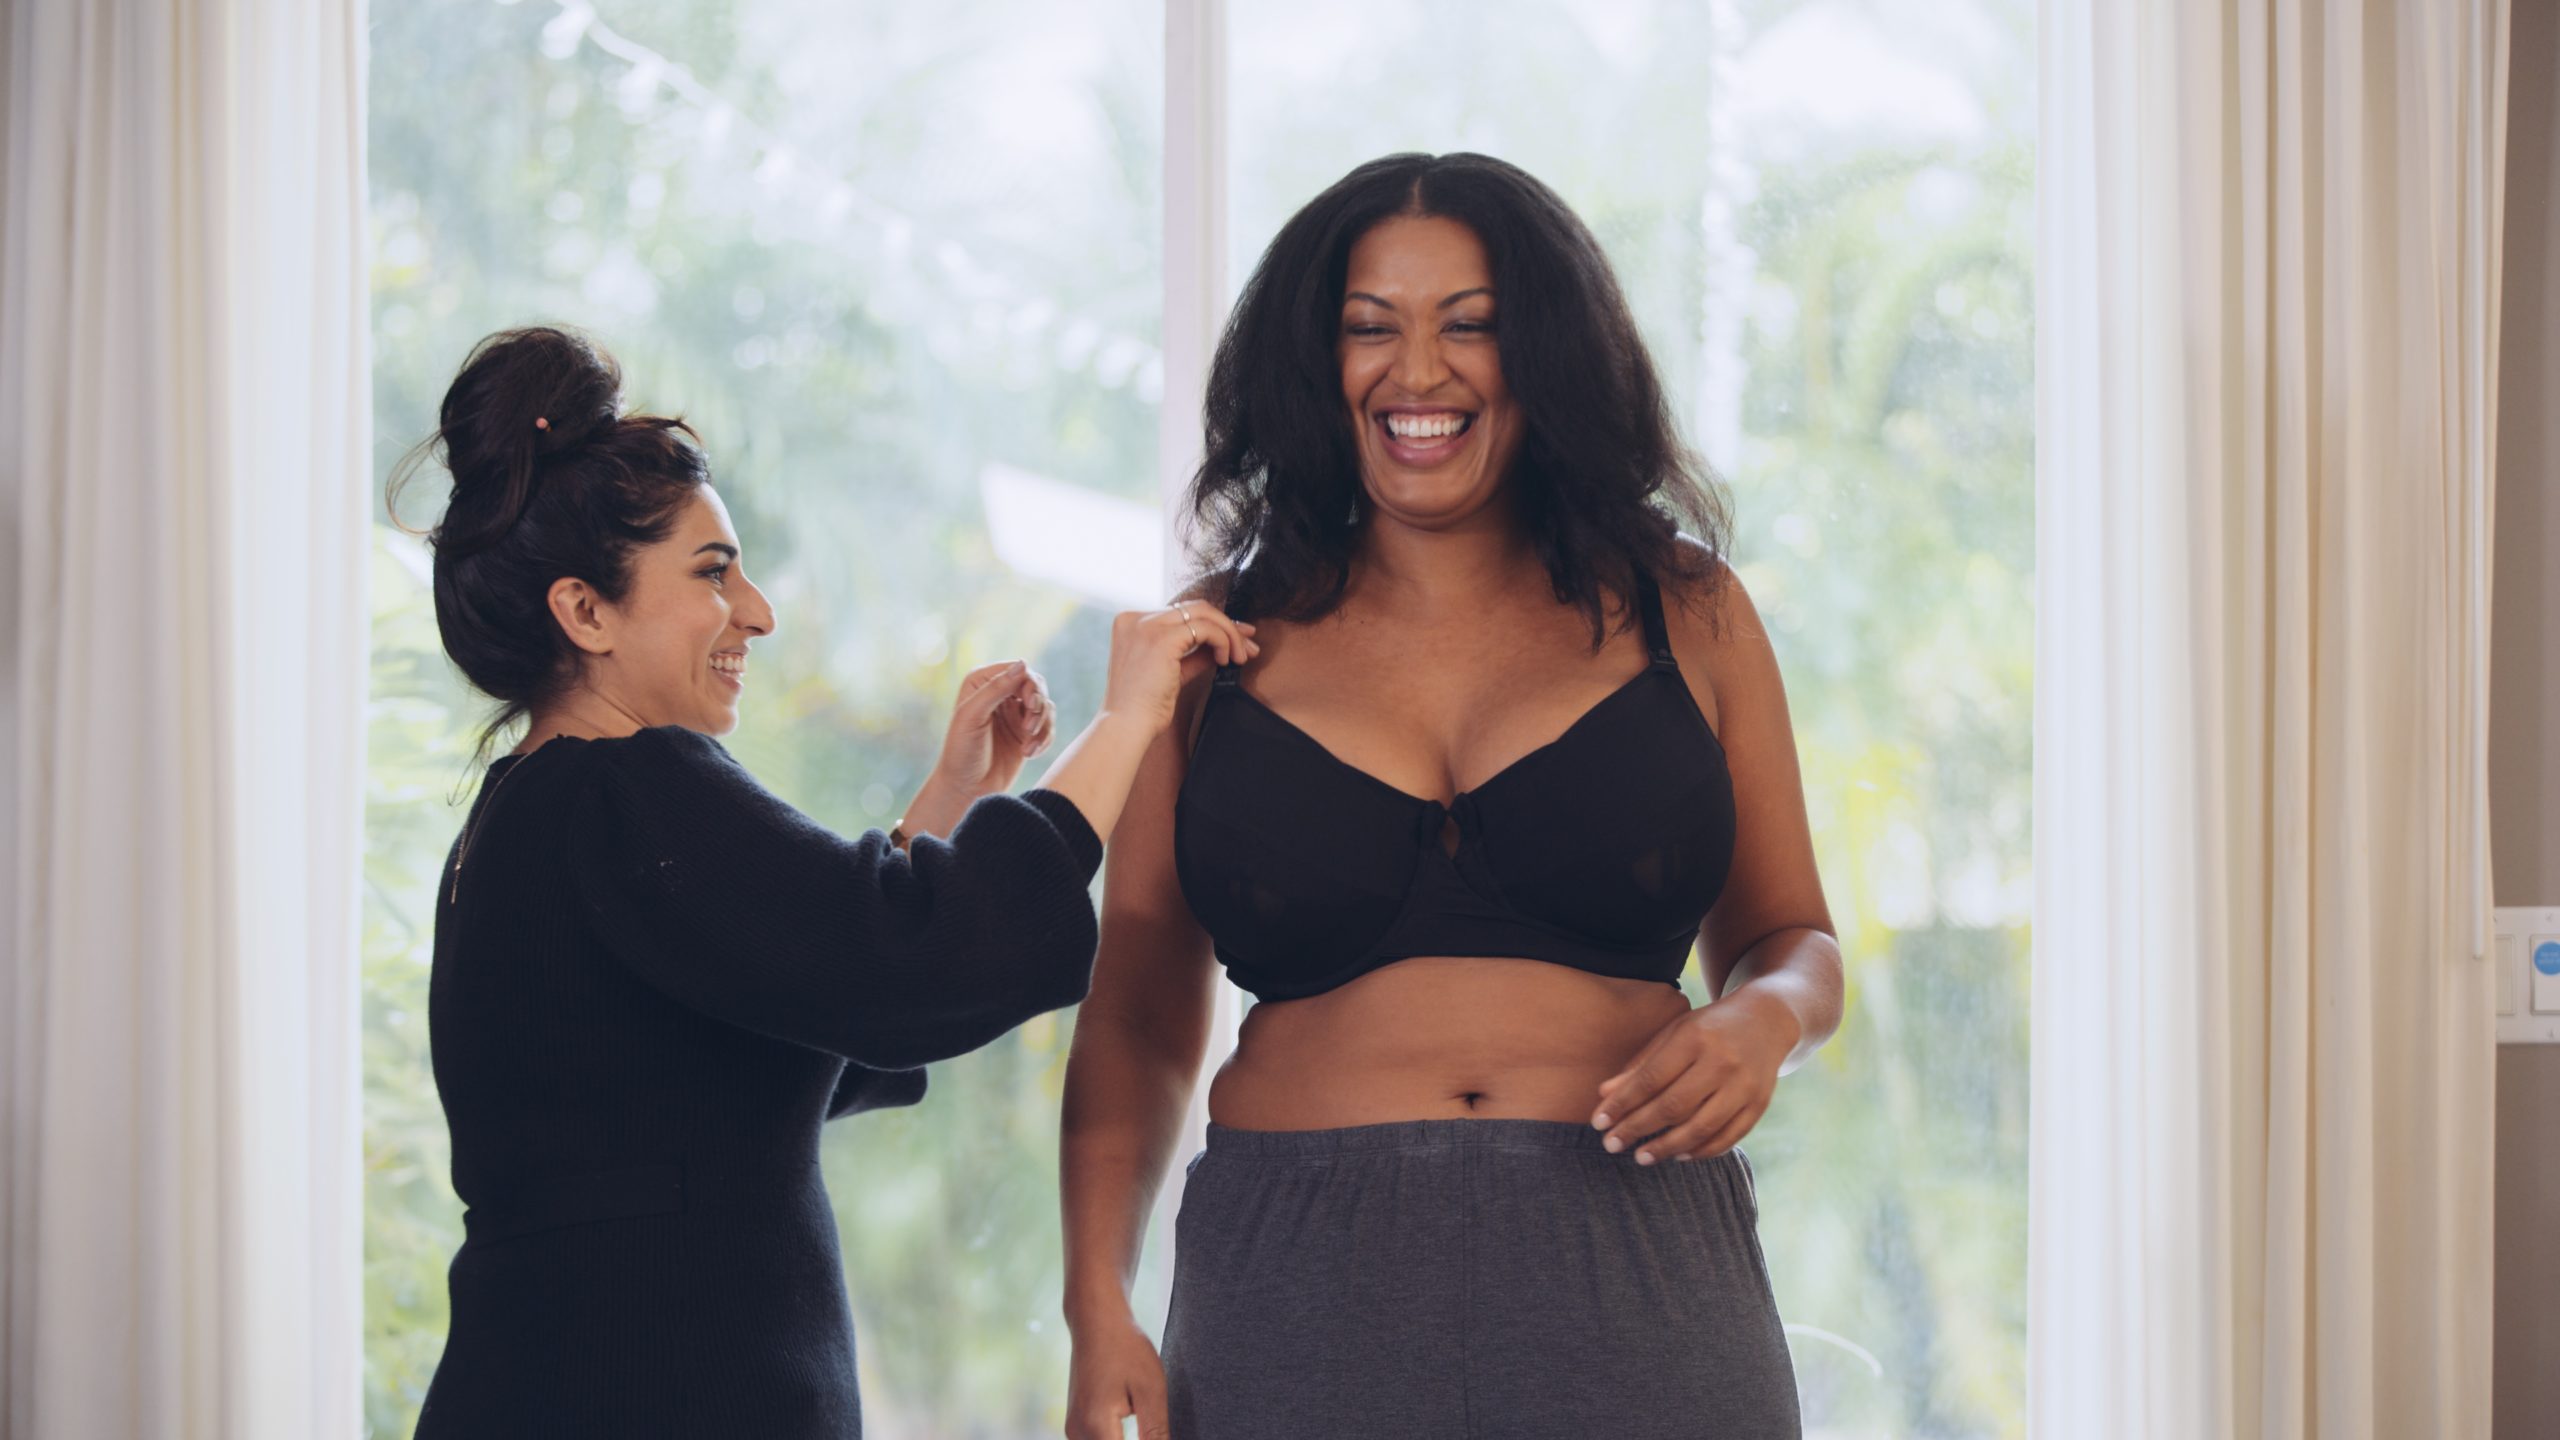 Woman with long hair in a bun adjusting bra strap on model with long brown hair and wearing black bra and grey sweatpants with both of them smiling